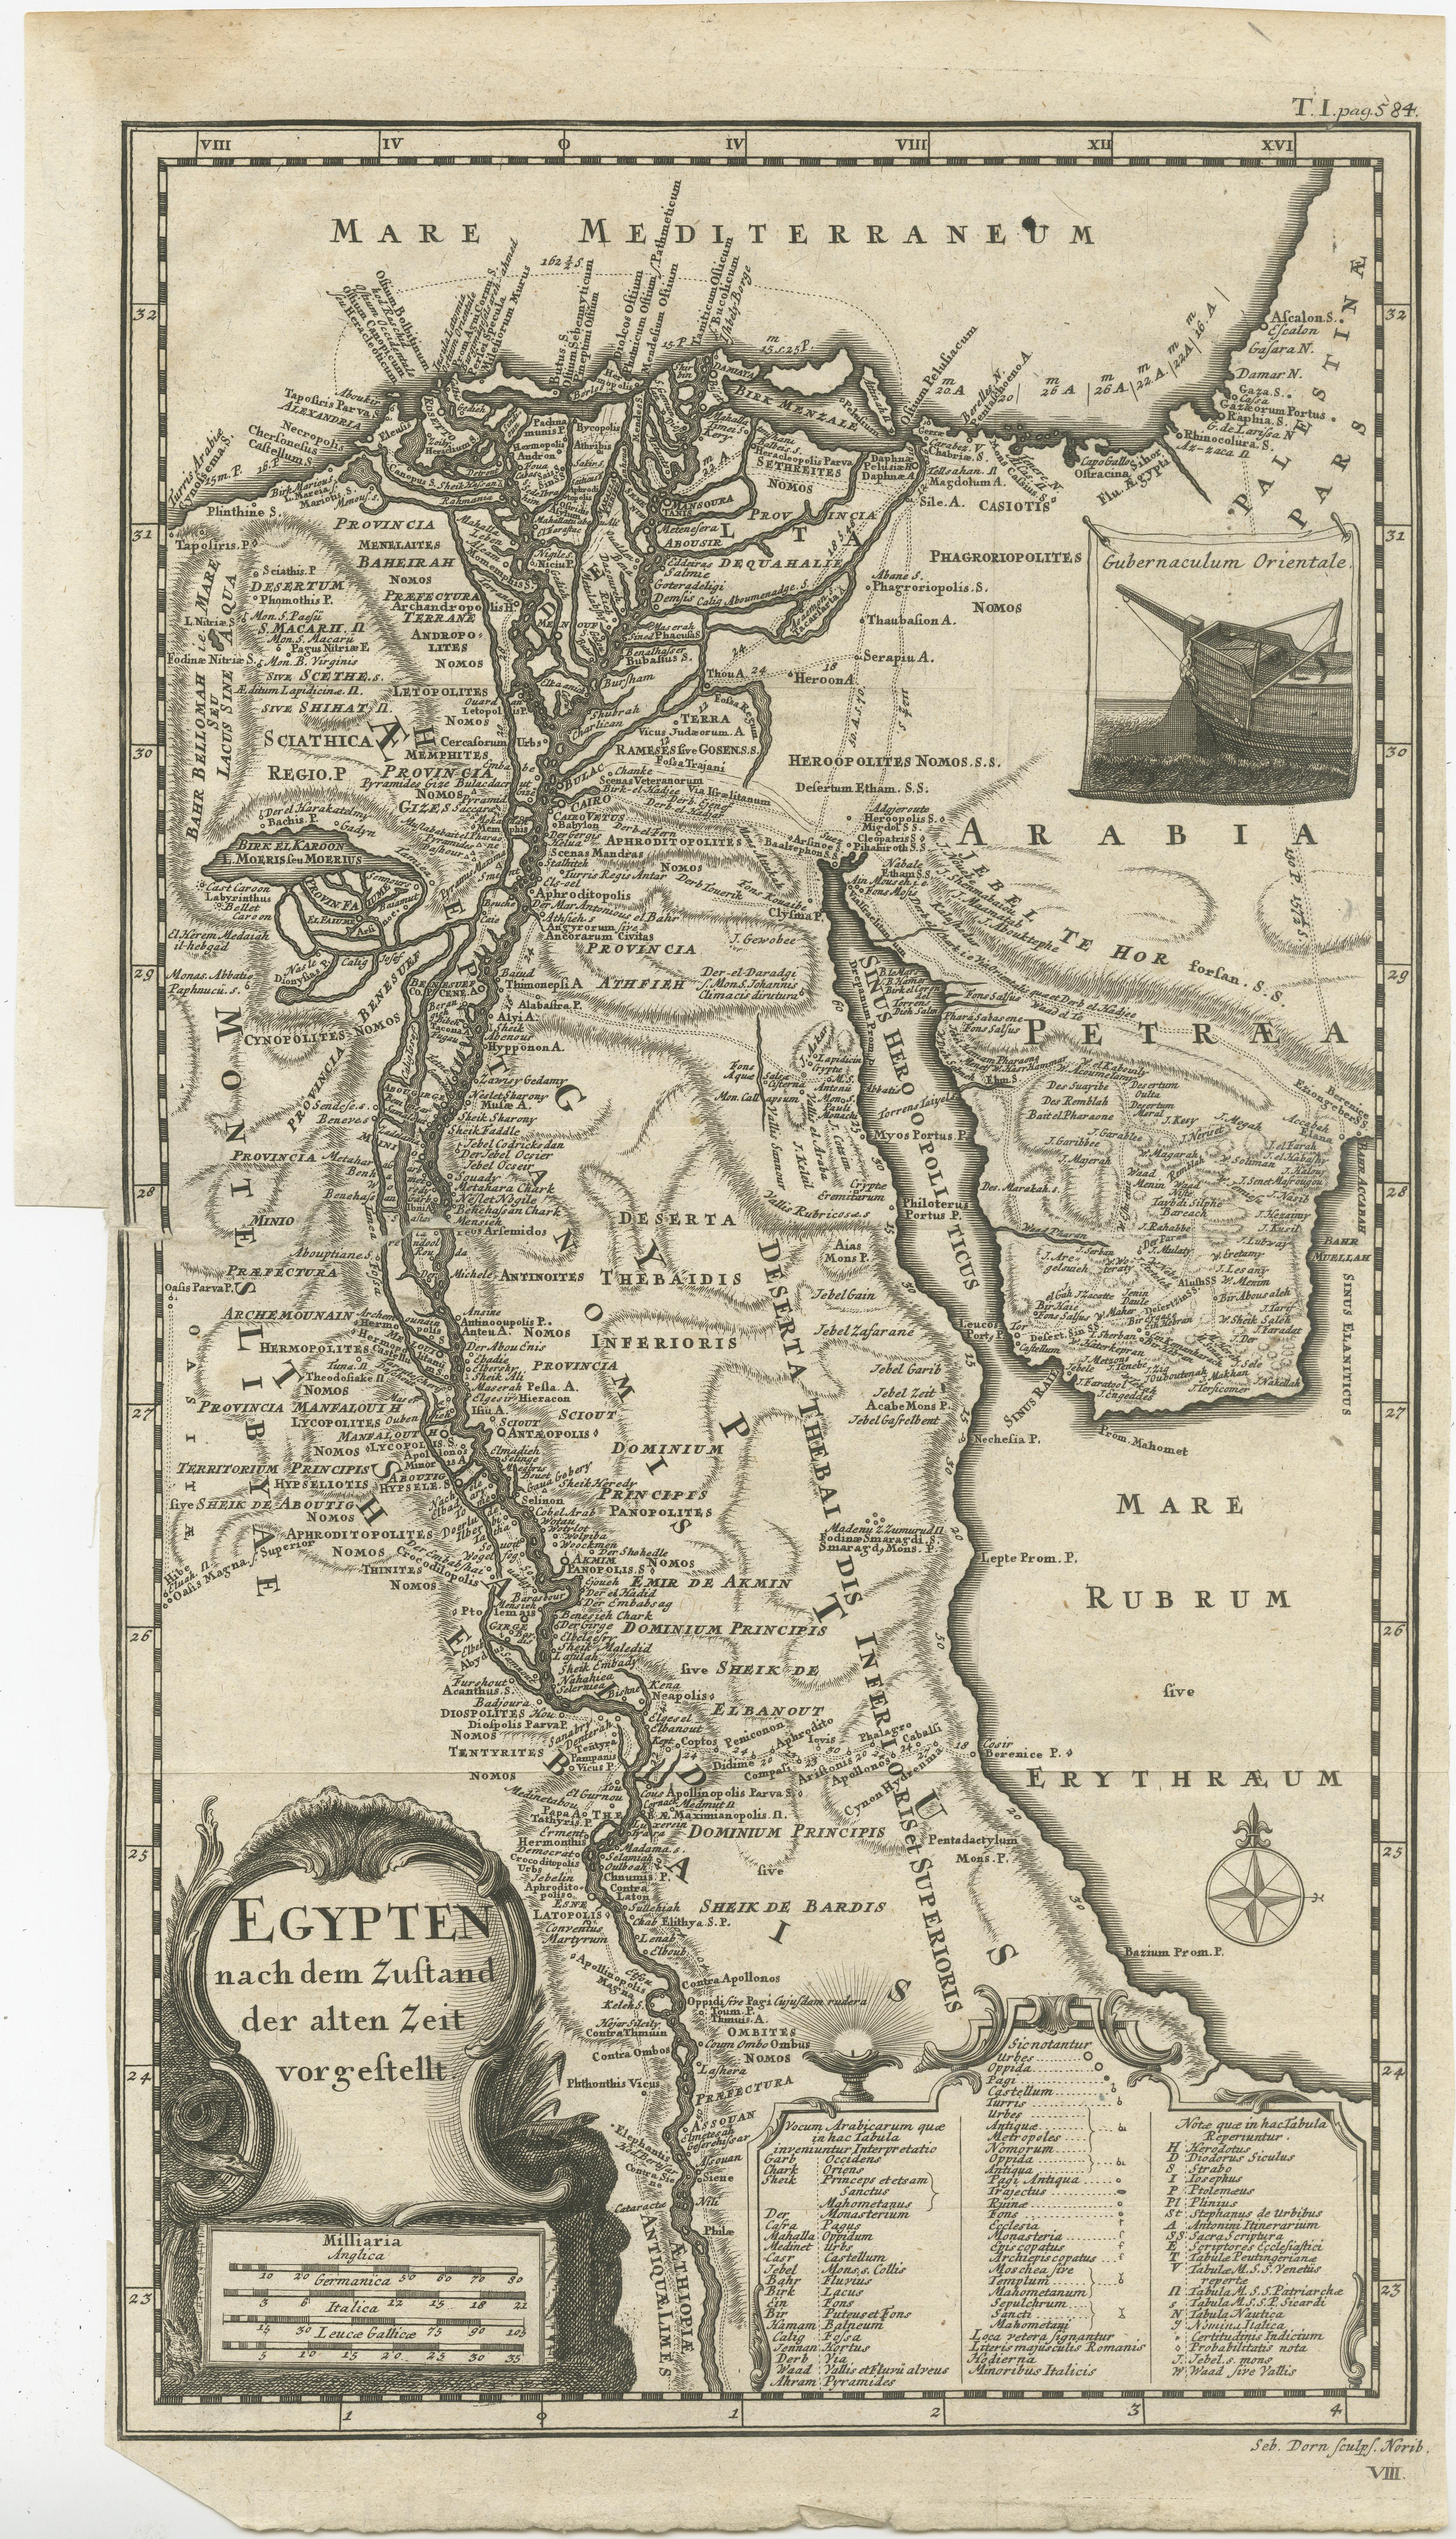 Antique map titled 'Egypten nach dem Zustand der alten Zeit vorgestellt'. This uncommon and richly detailed map of Egypt features hundreds of place names along the Nile. The Sinai Peninsula is shown with a strangely stub-like tip. An inset at right